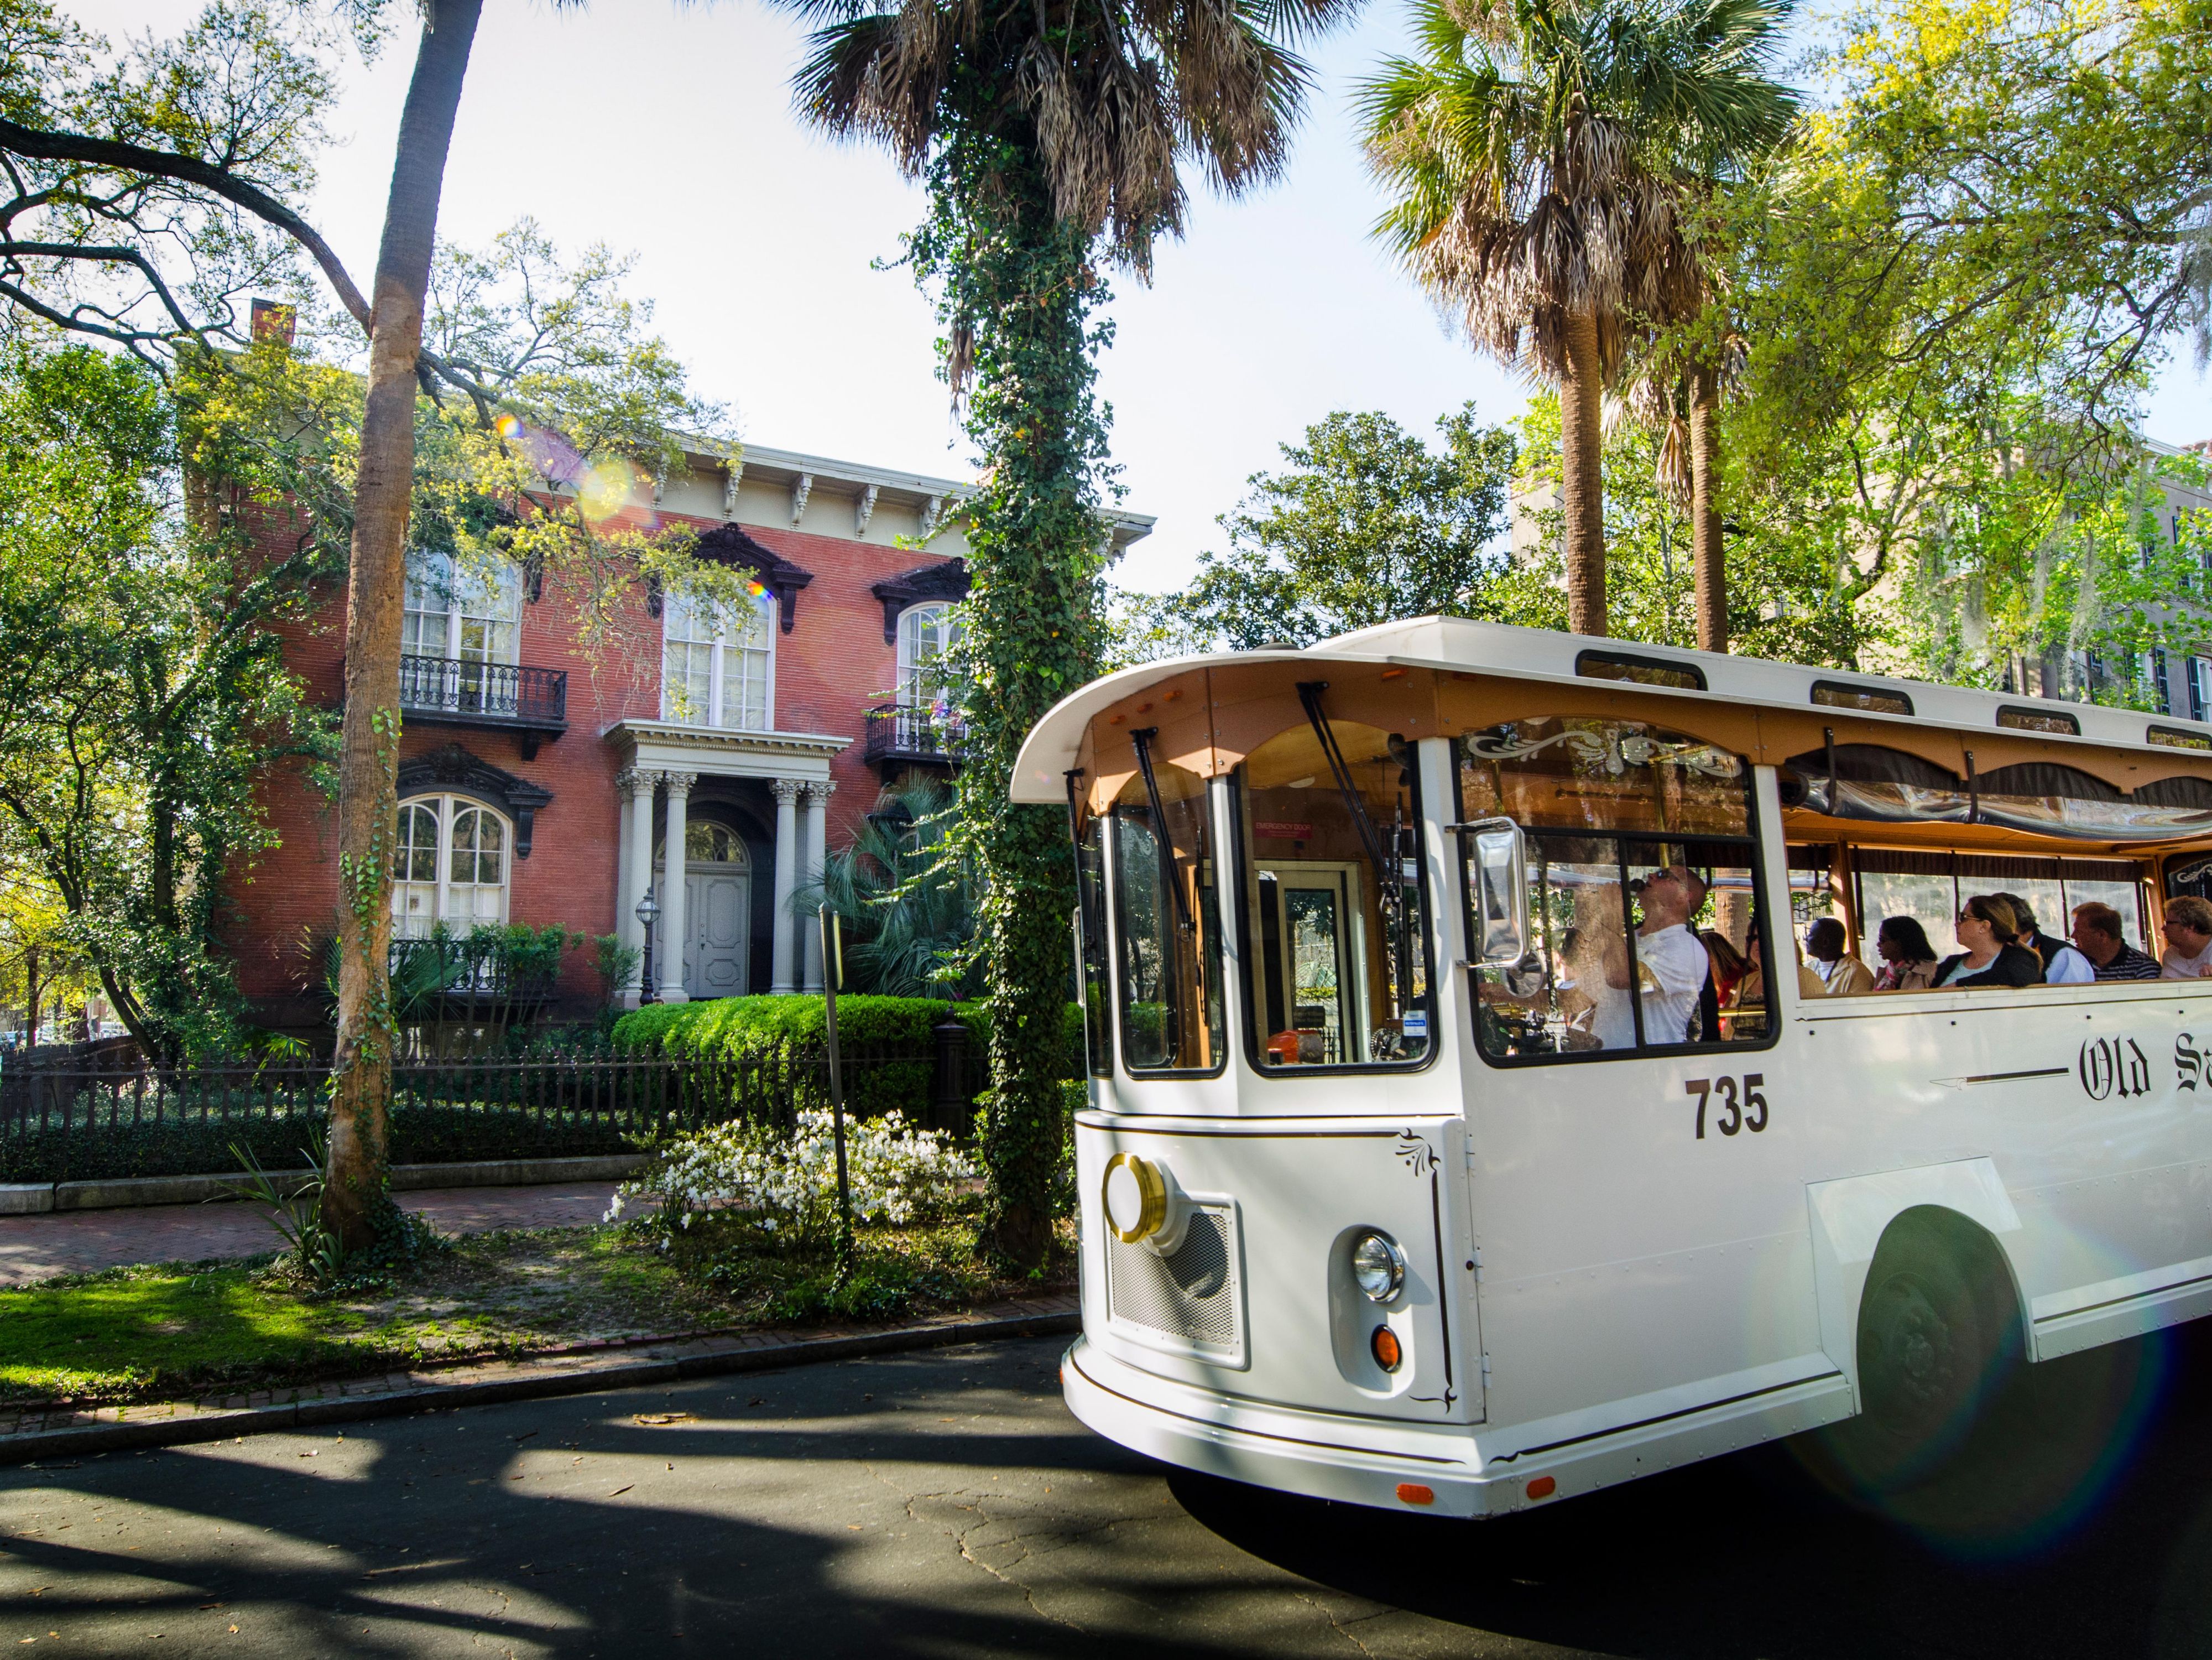 Need help planning your stay? We've got you covered! With our onsite concierge, you can get the inside scoop on all of Savannah's best attractions. Wondering which tour to take? Let us reserve a trolley tour and have the trolley pick you up at our front door. Have all the fun and leave the planning to us.